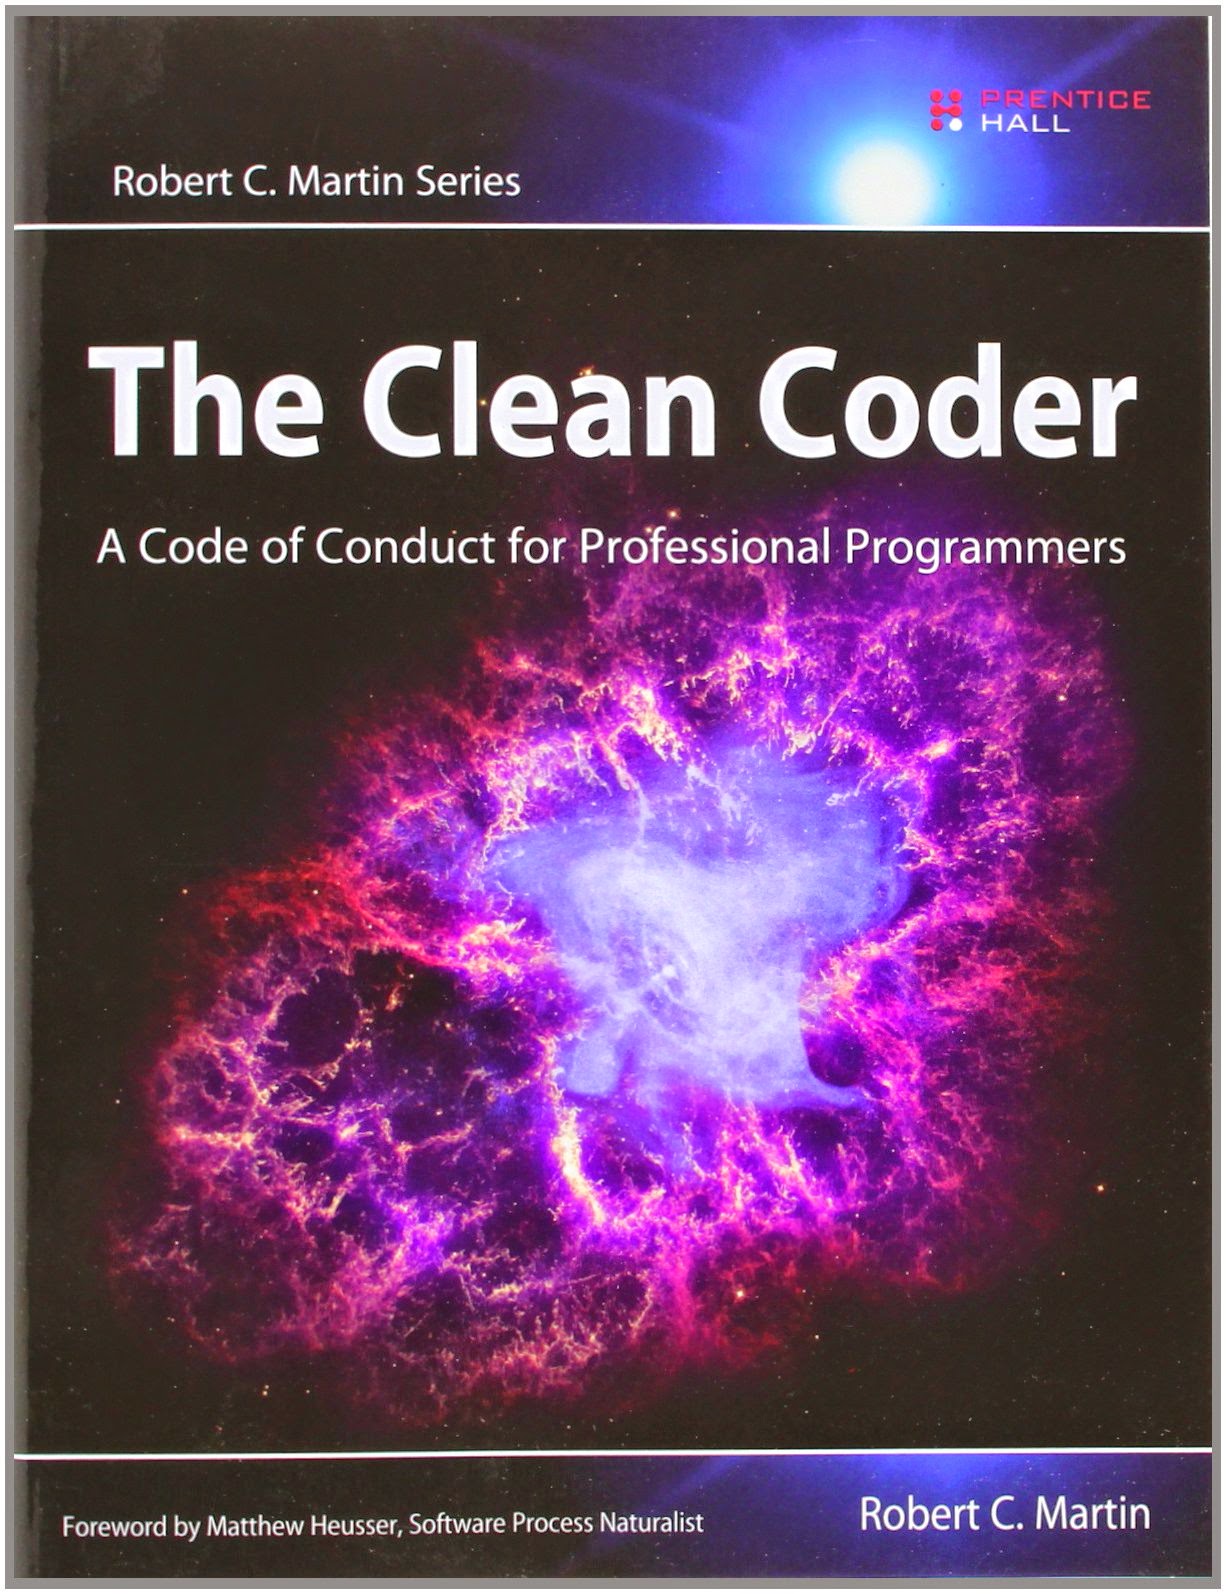 Must read book for every programmer